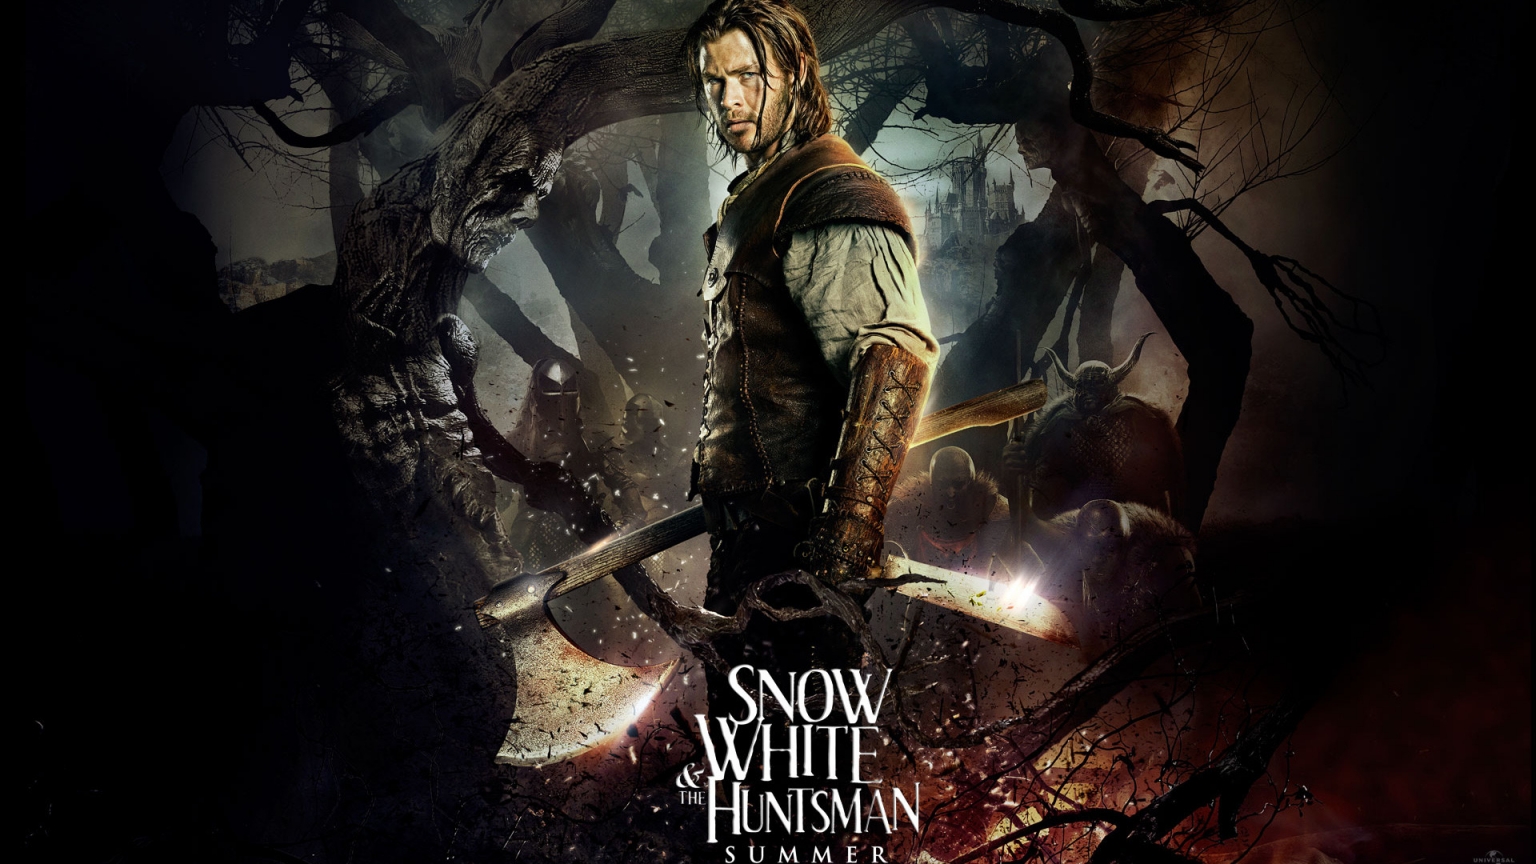 The Huntsman in Snow White Movie 2012 for 1536 x 864 HDTV resolution